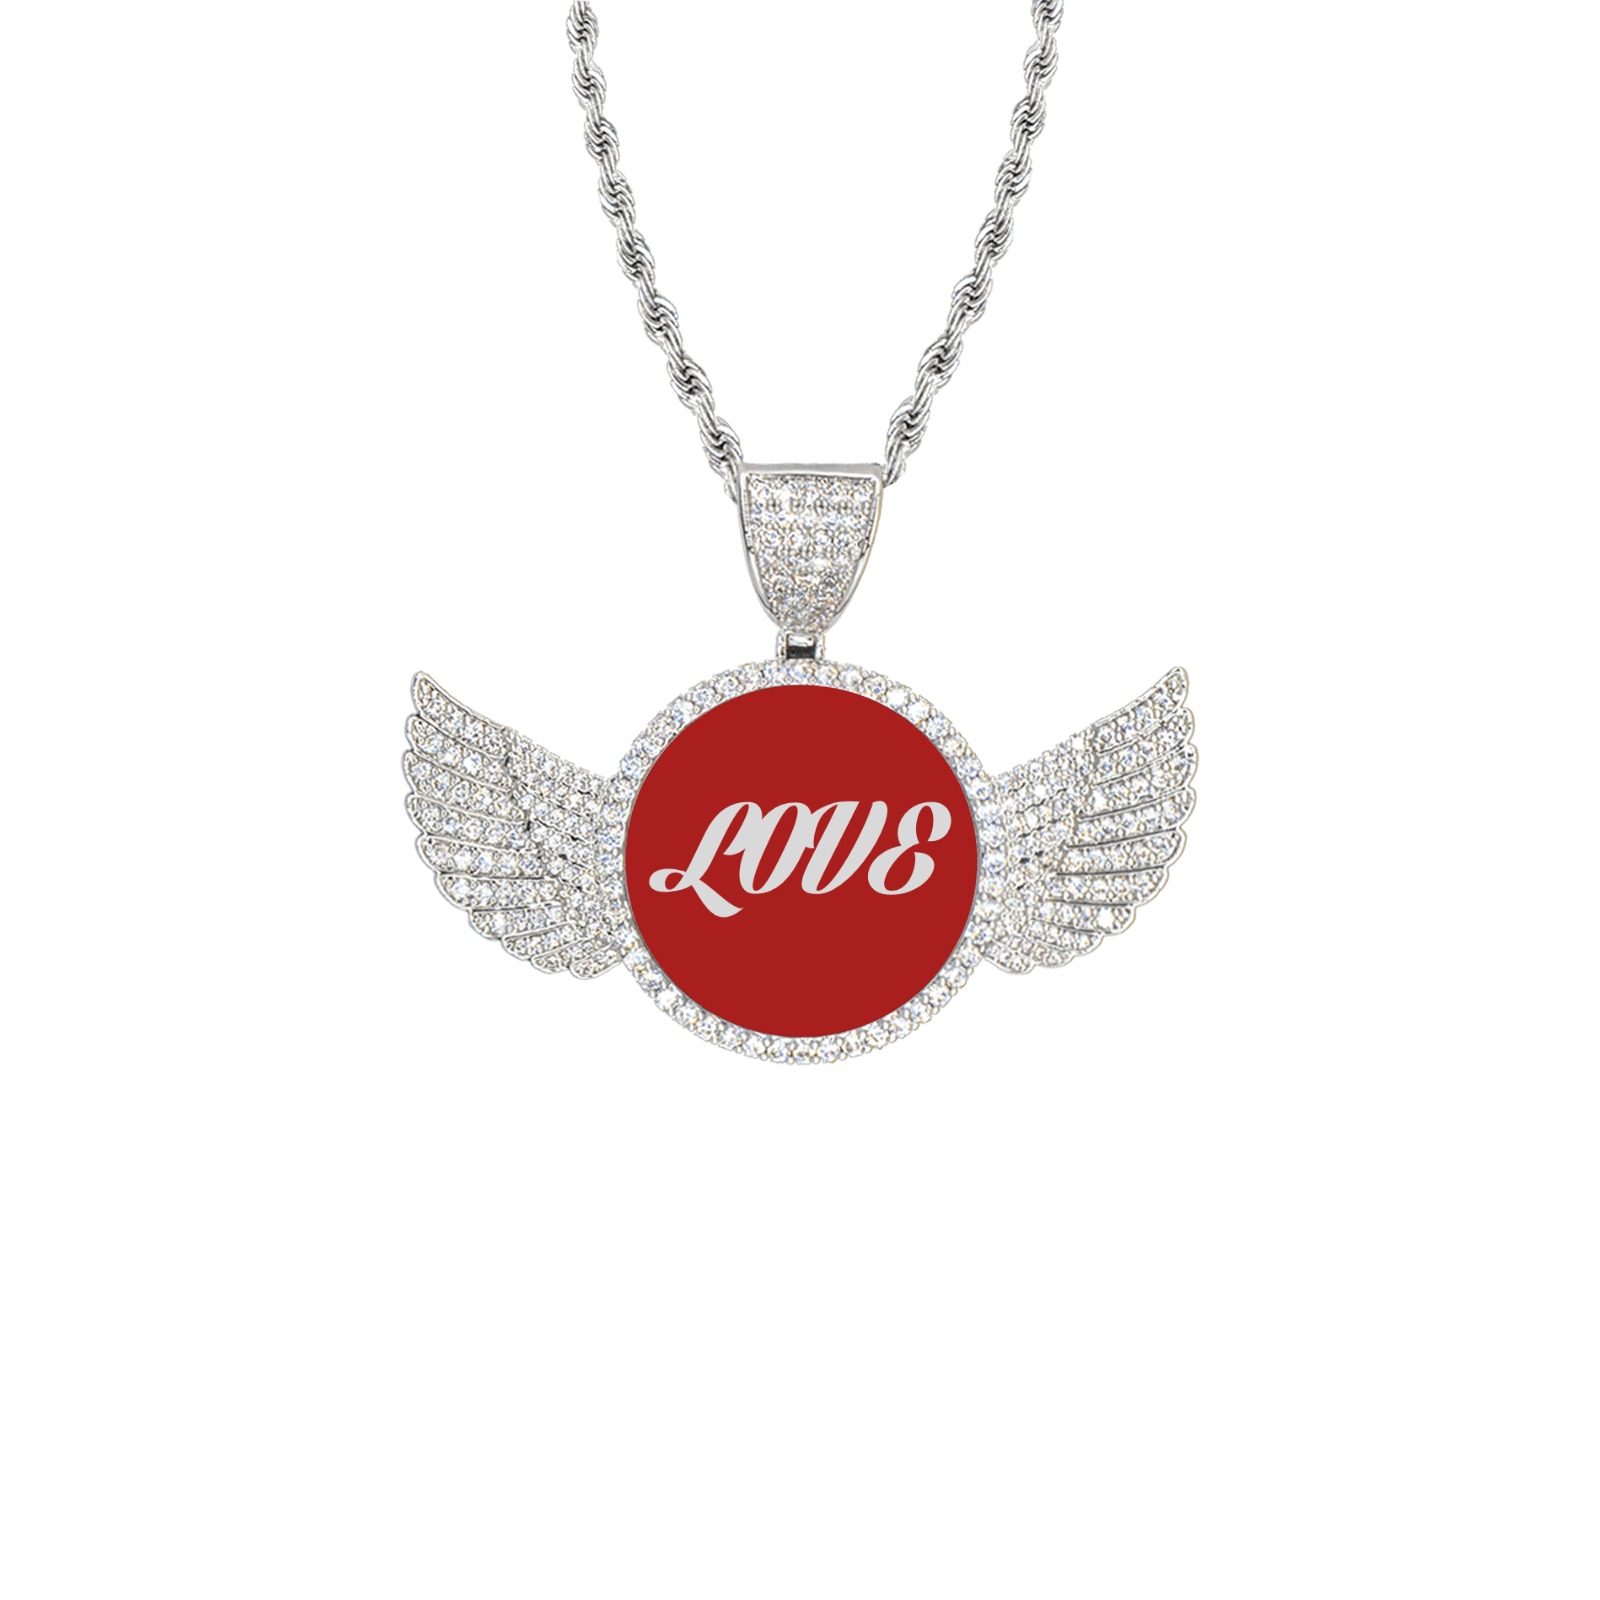 BB 890141 Wings Silver Photo Pendant with Rope Chain